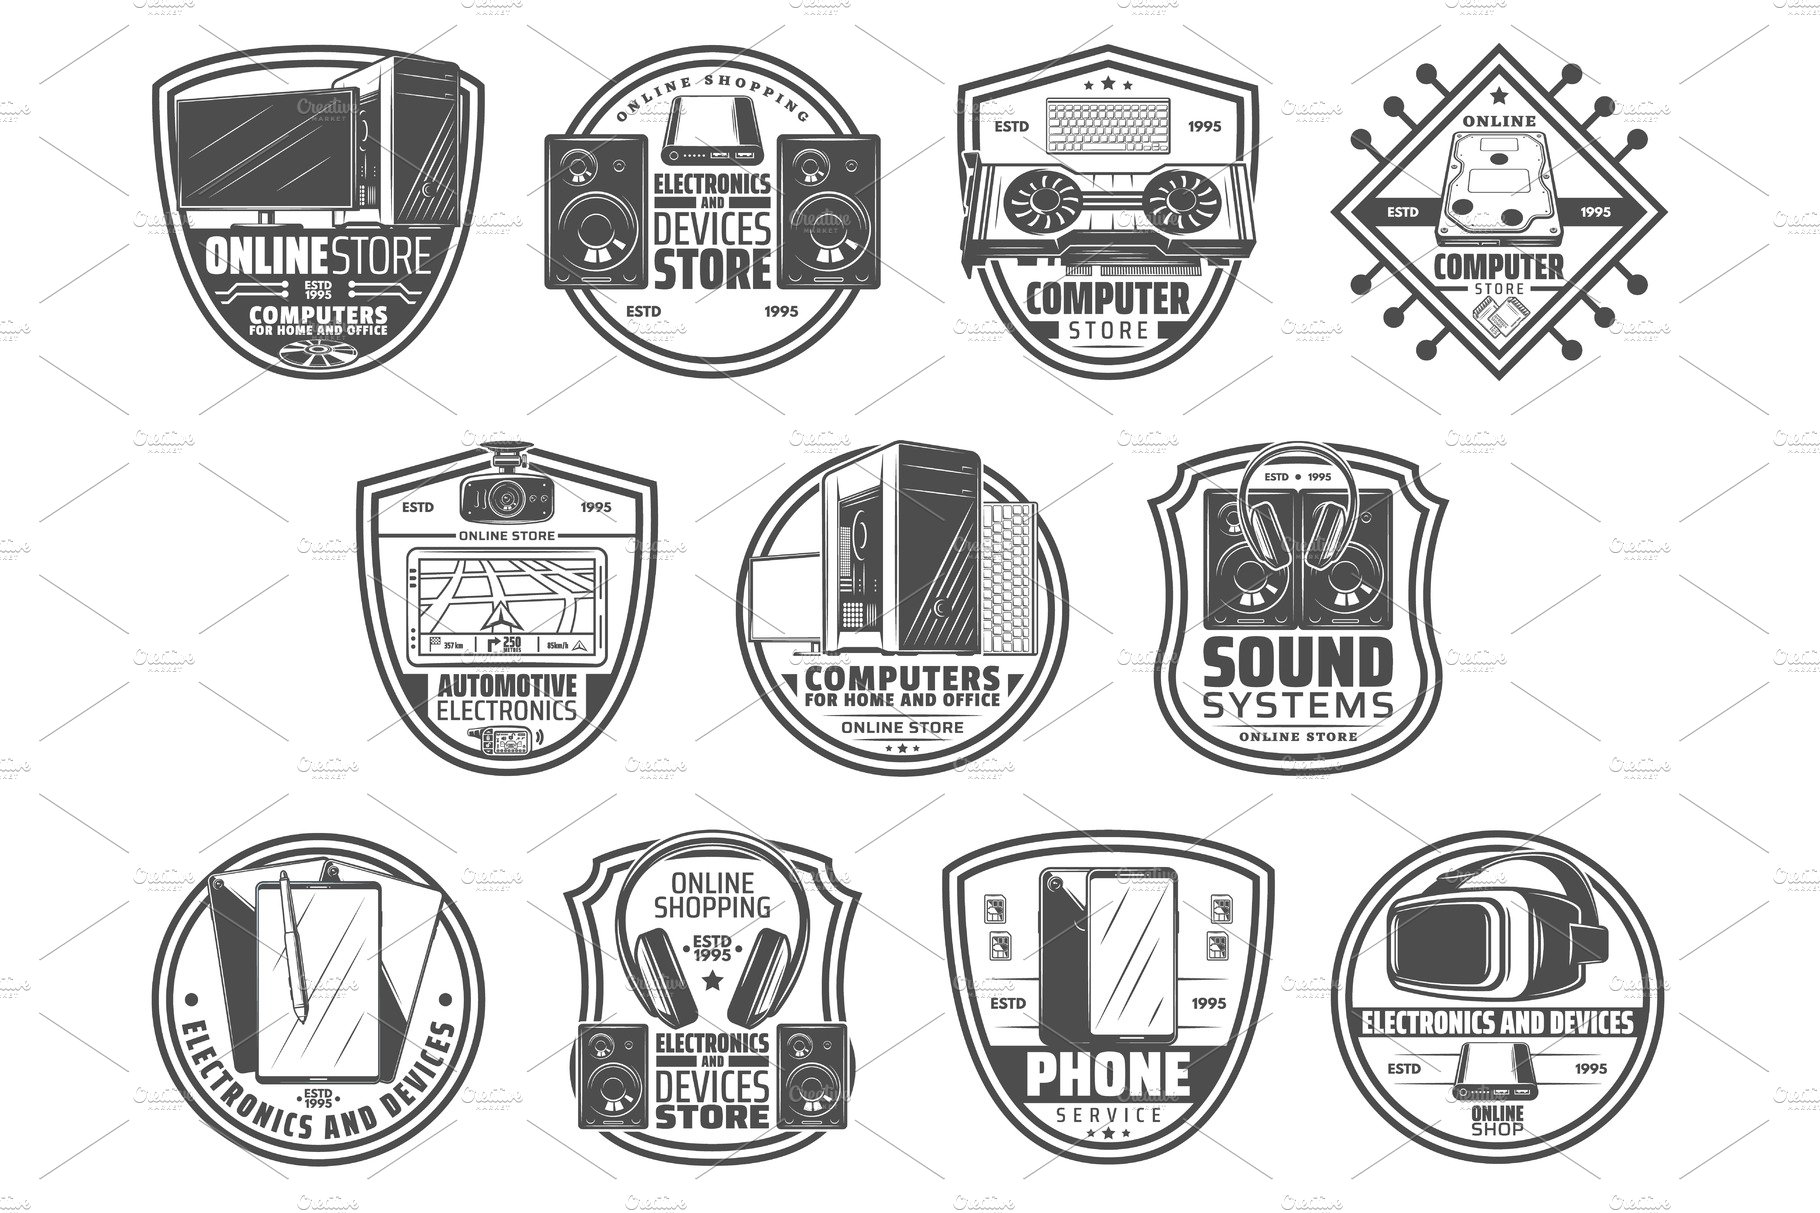 Gadgets and devices retro icons cover image.